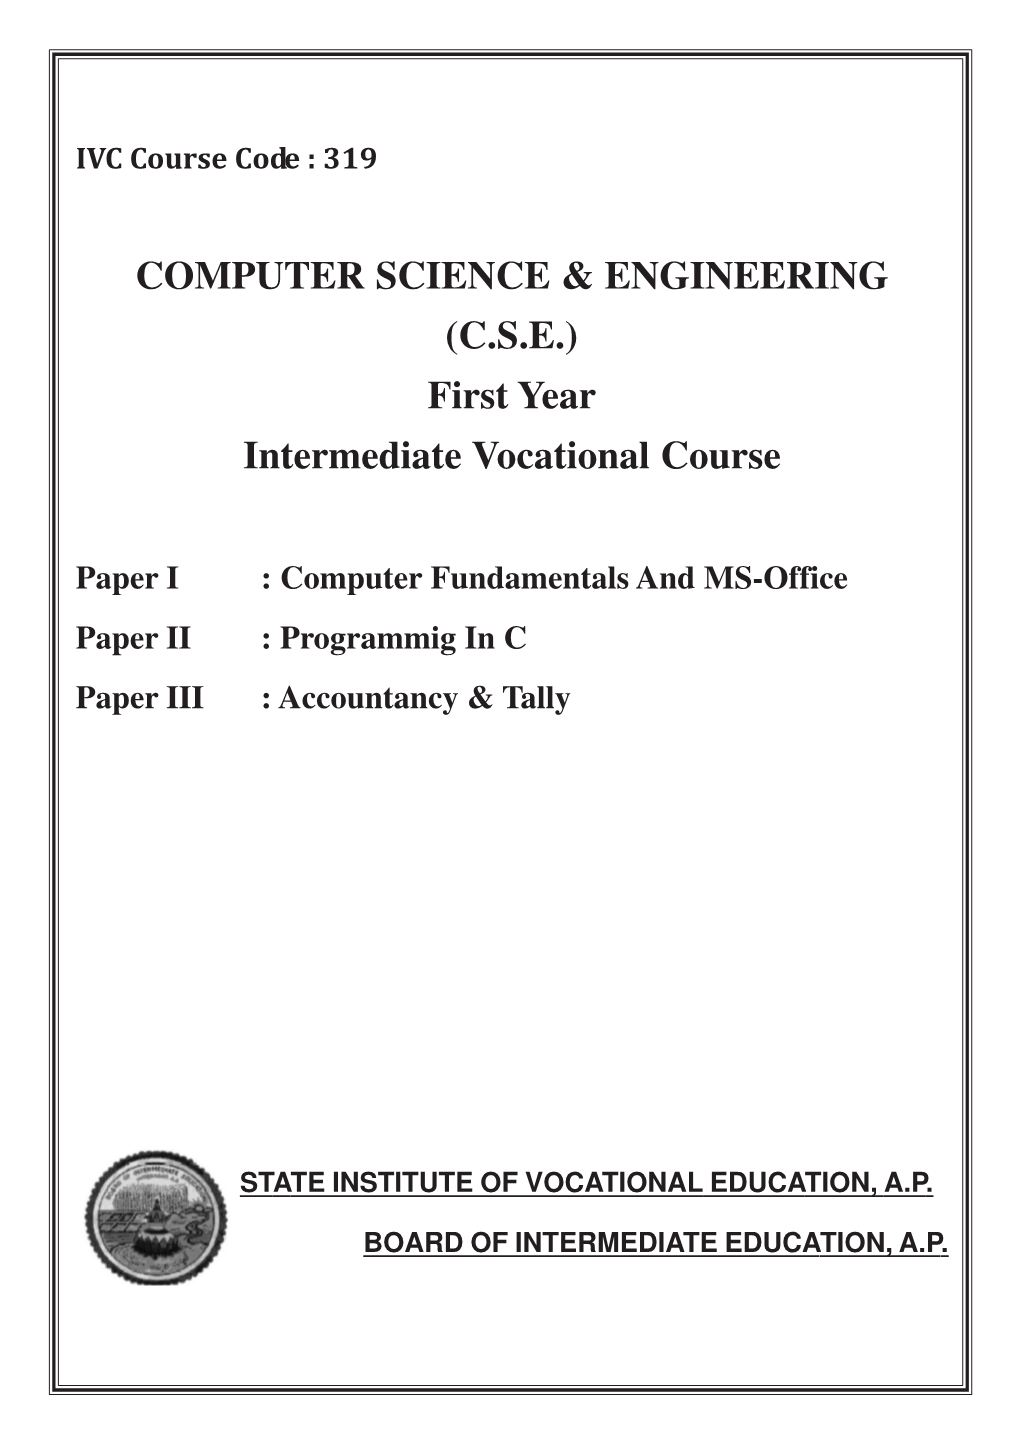 COMPUTER SCIENCE & ENGINEERING (C.S.E.) First Year